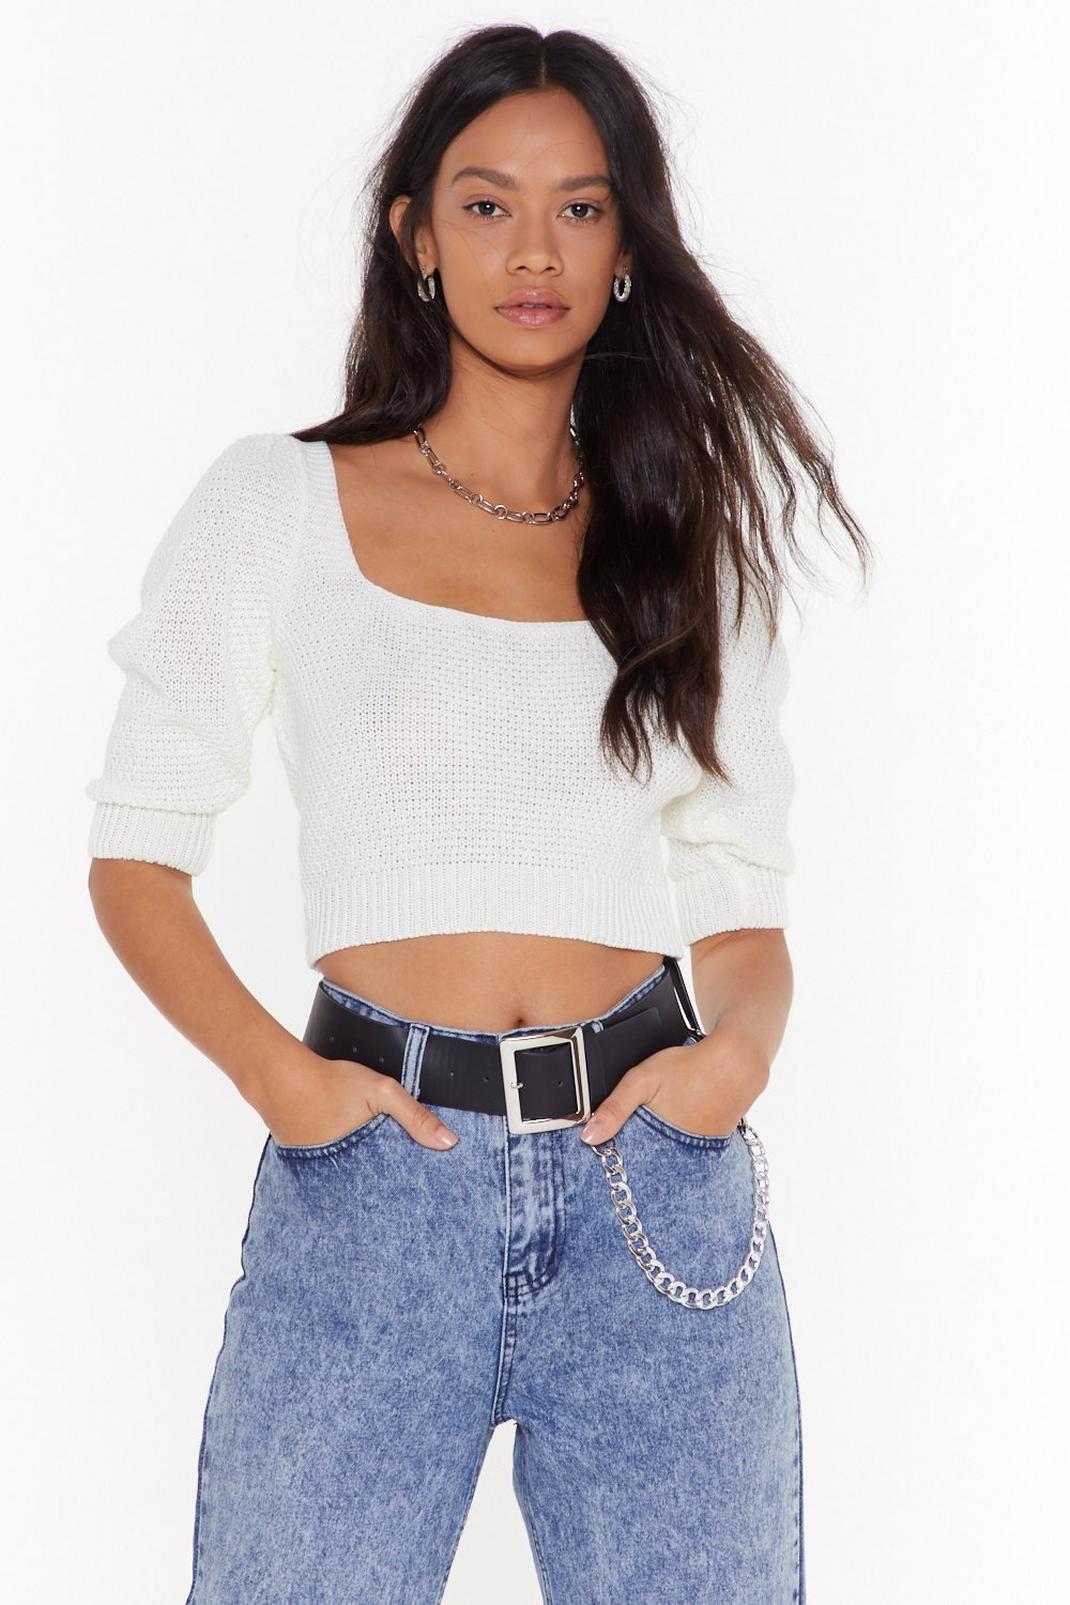 Leave Knit With Me Square Neck Sweater | Nasty Gal